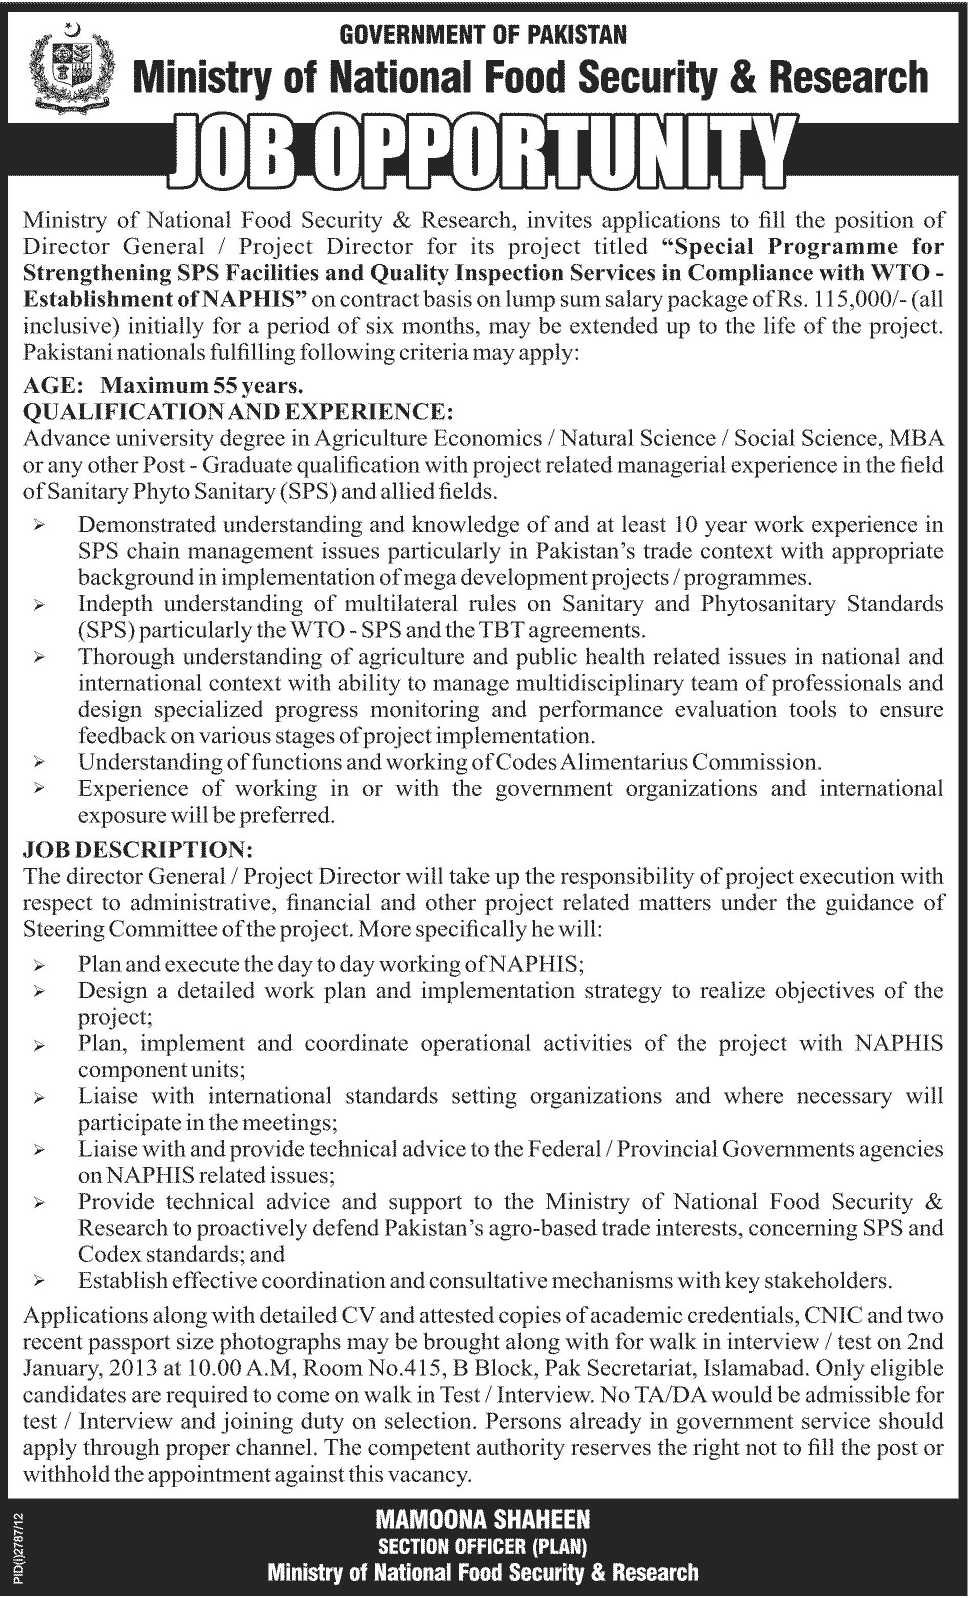 Ministry of National Food Security & Research Government of Pakistan Job for DG